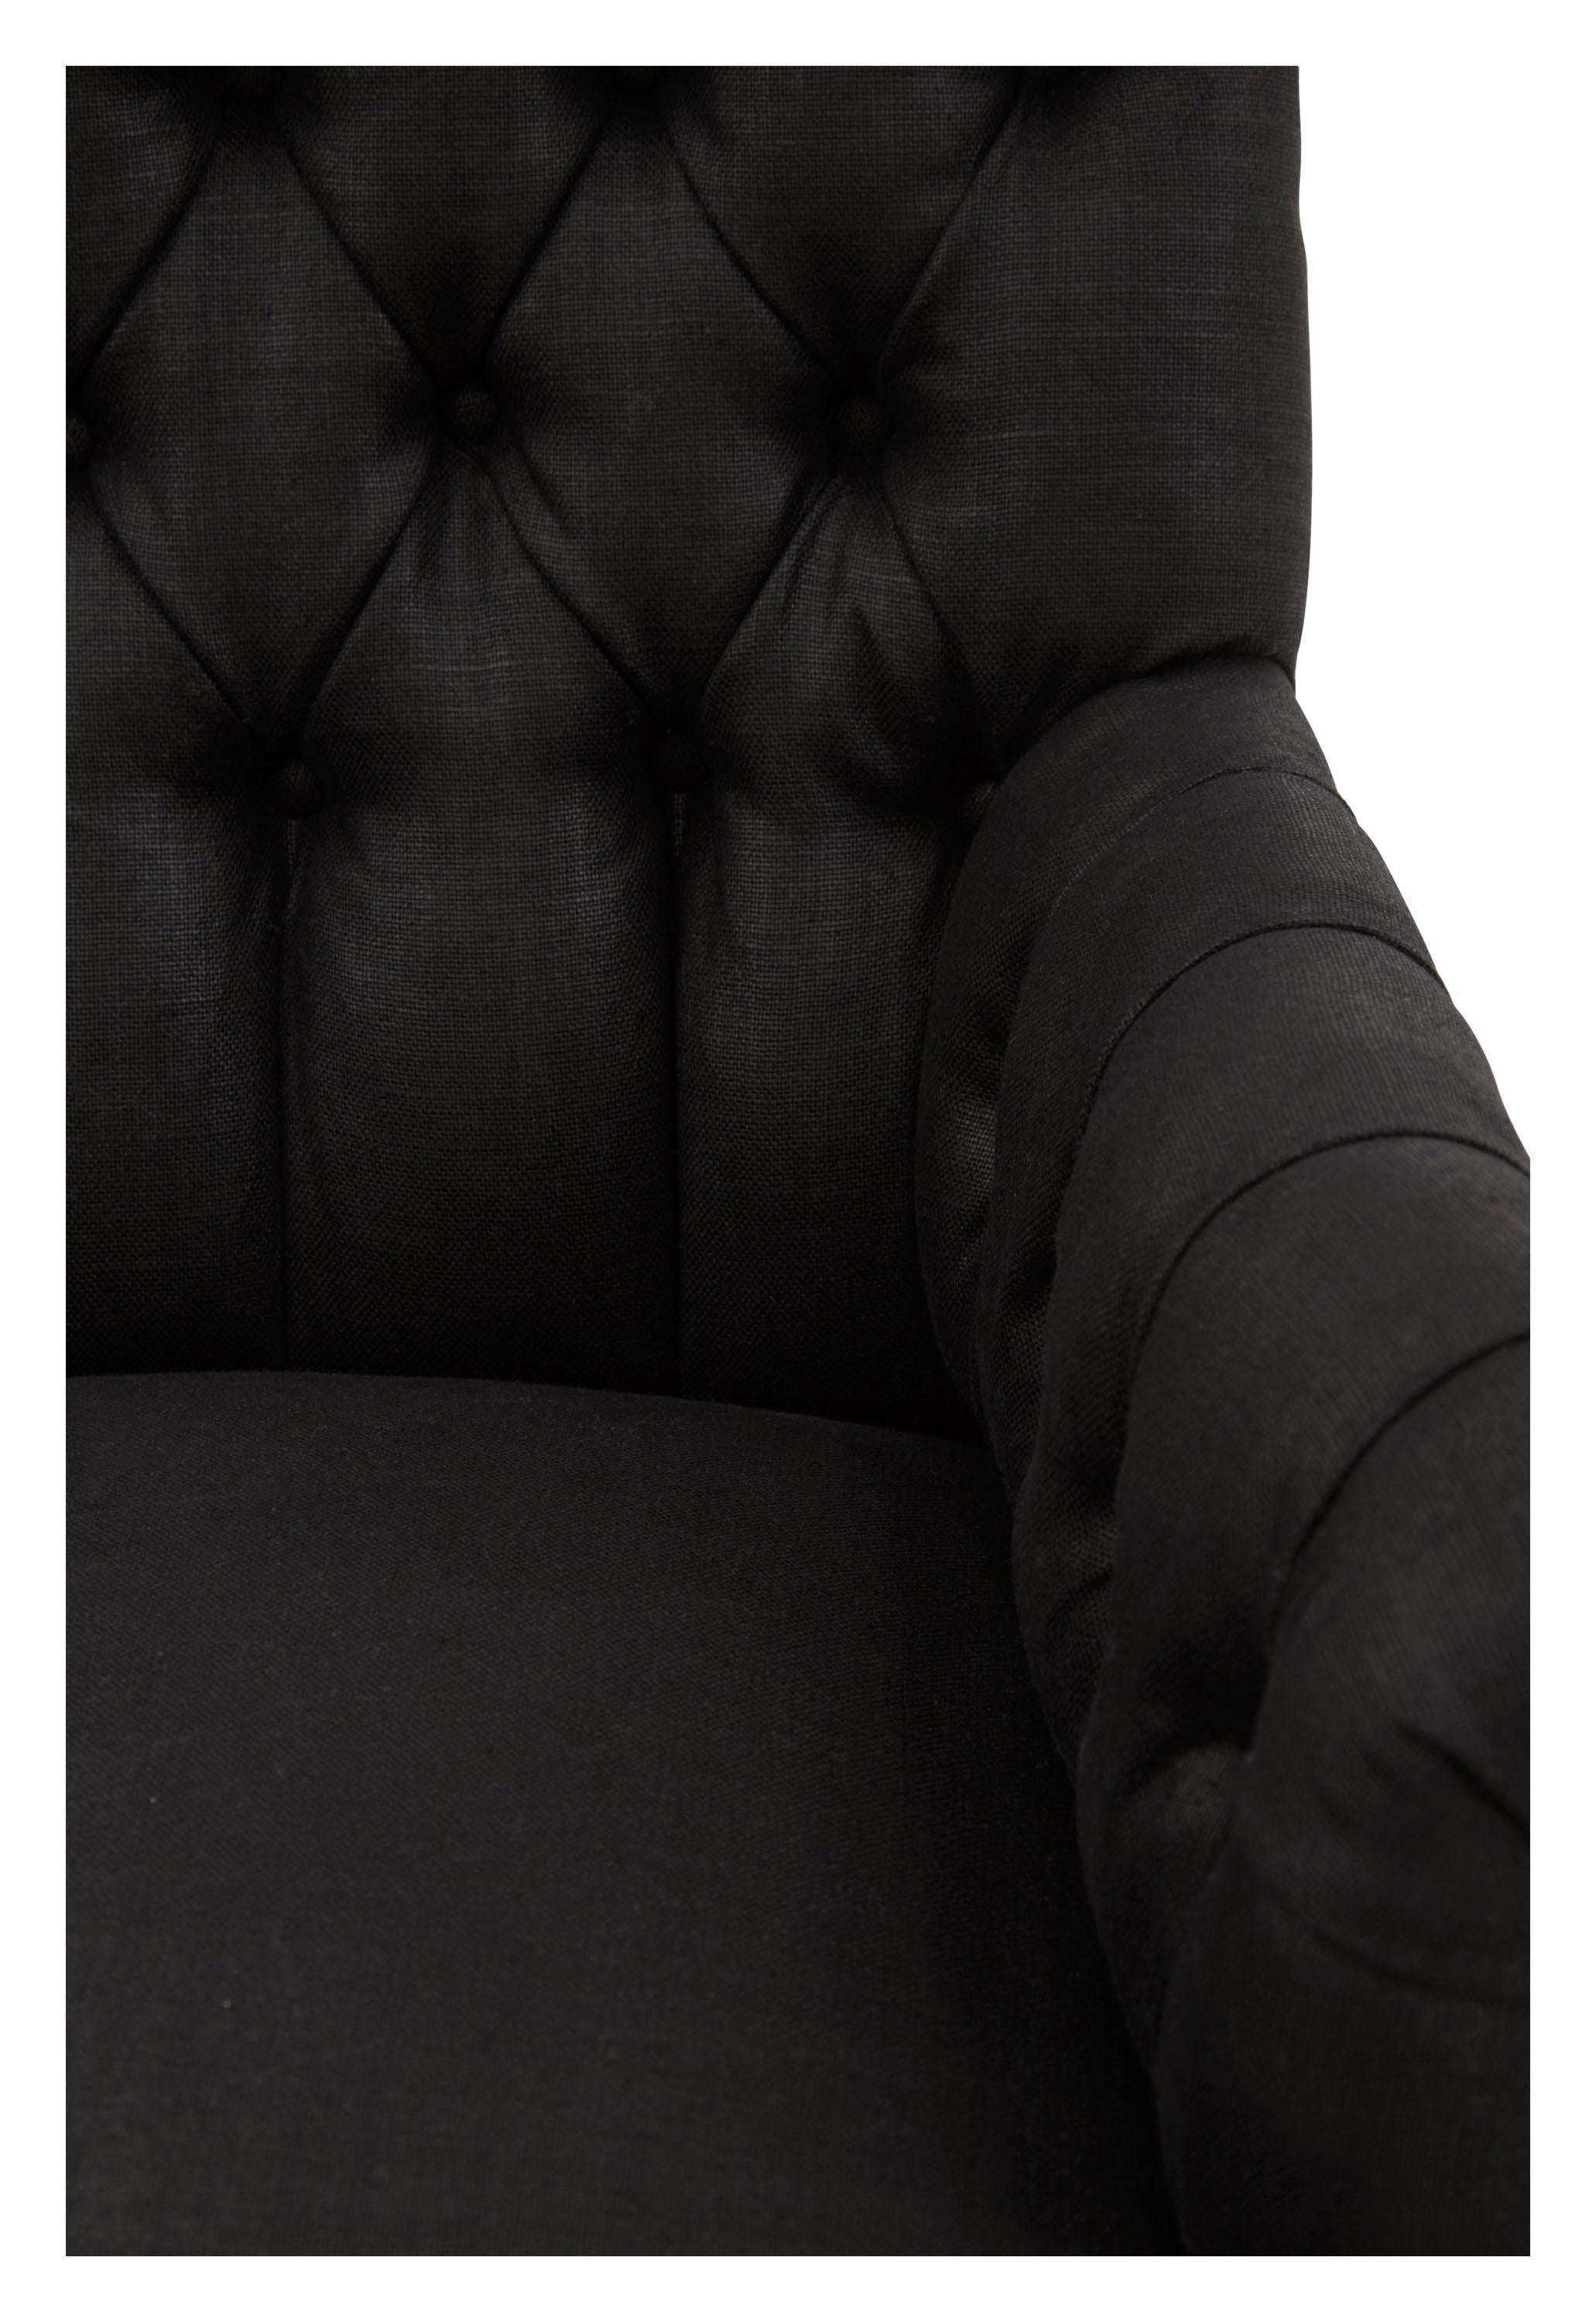 19th Century Napoleon III Tufted Armchair Reupholstered in Black Glazed Linen